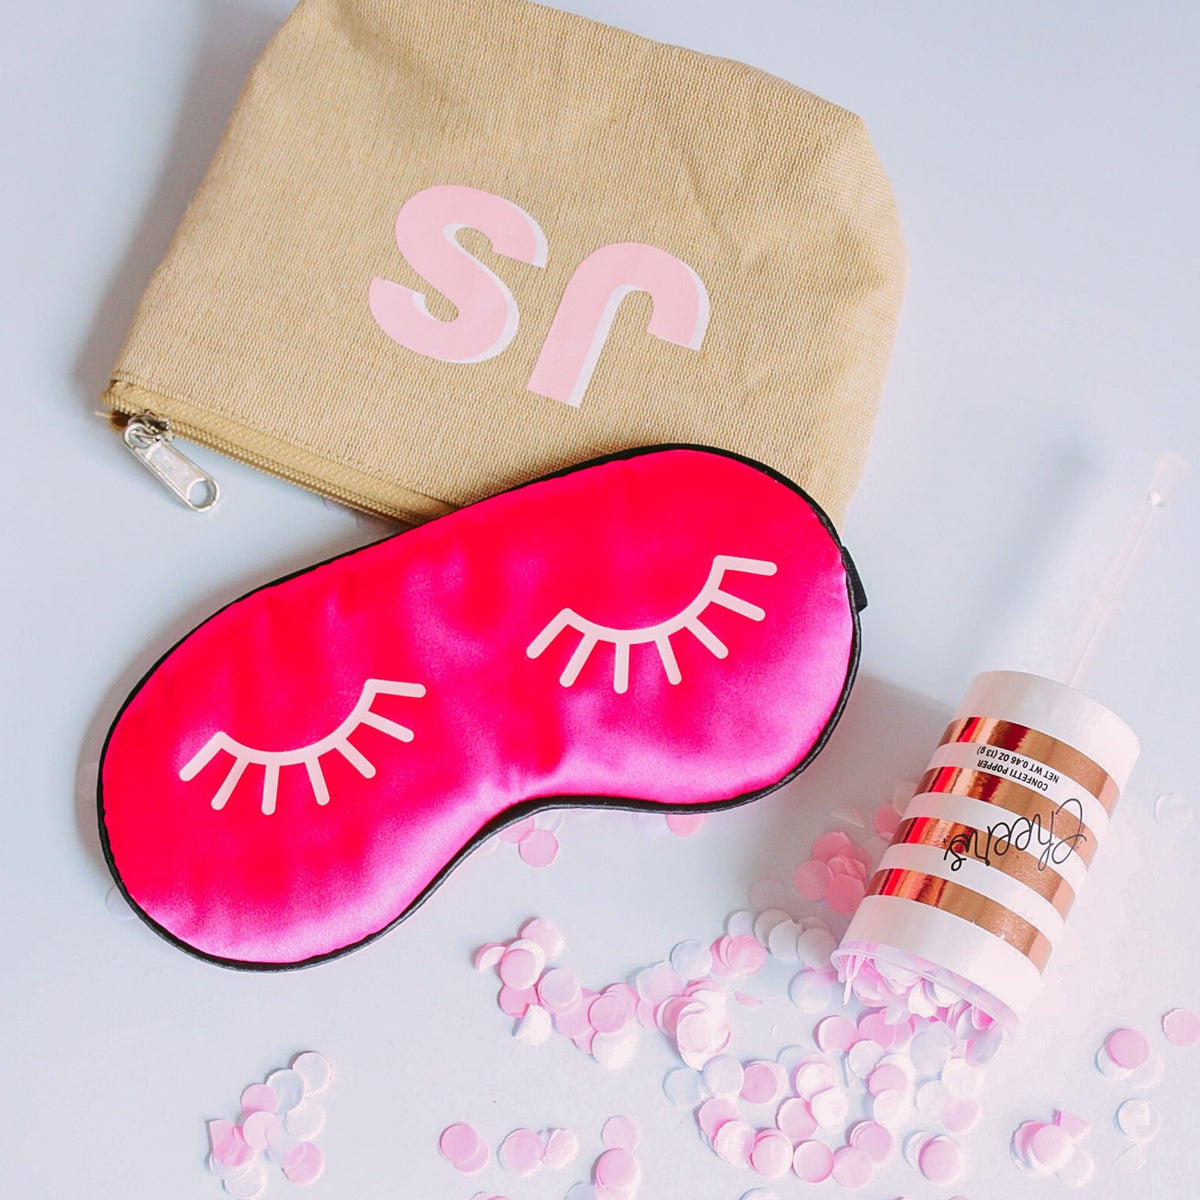 Lashes Sleep Mask - Sprinkled With Pink